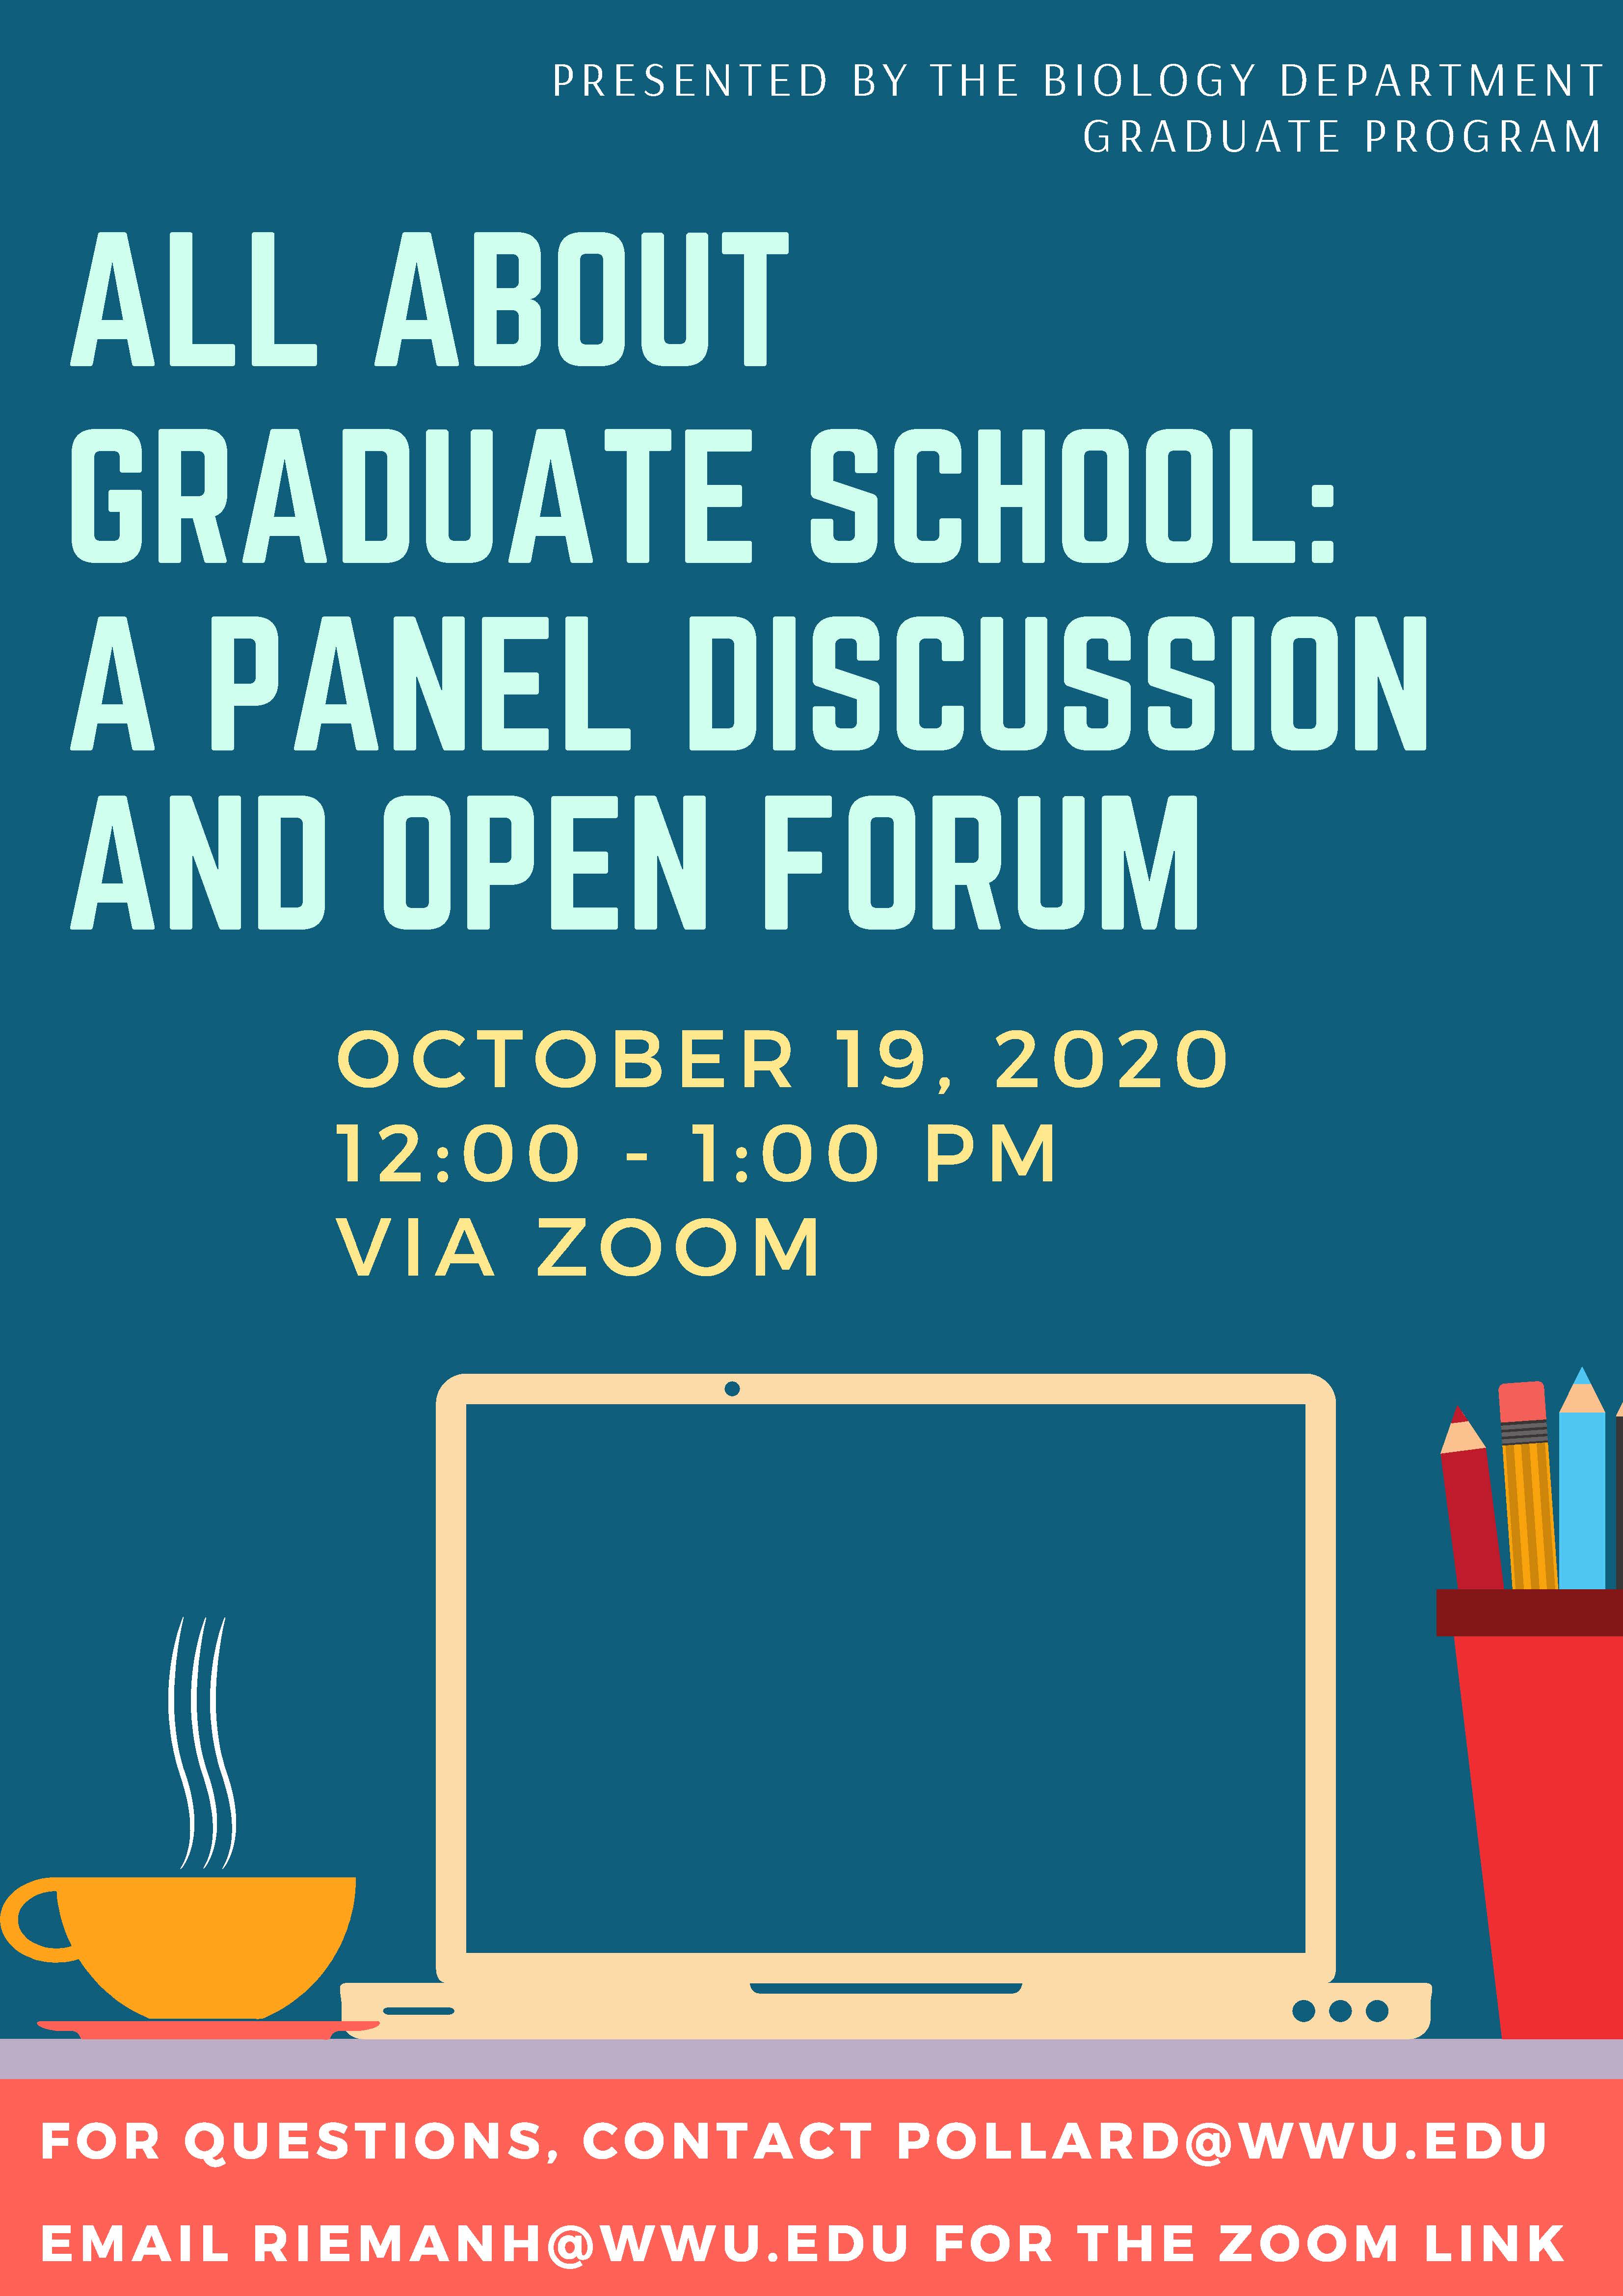 All About Graduate School: A Panel Discussion and Open Forum, Oct. 19, 12-1 PM, via Zoom